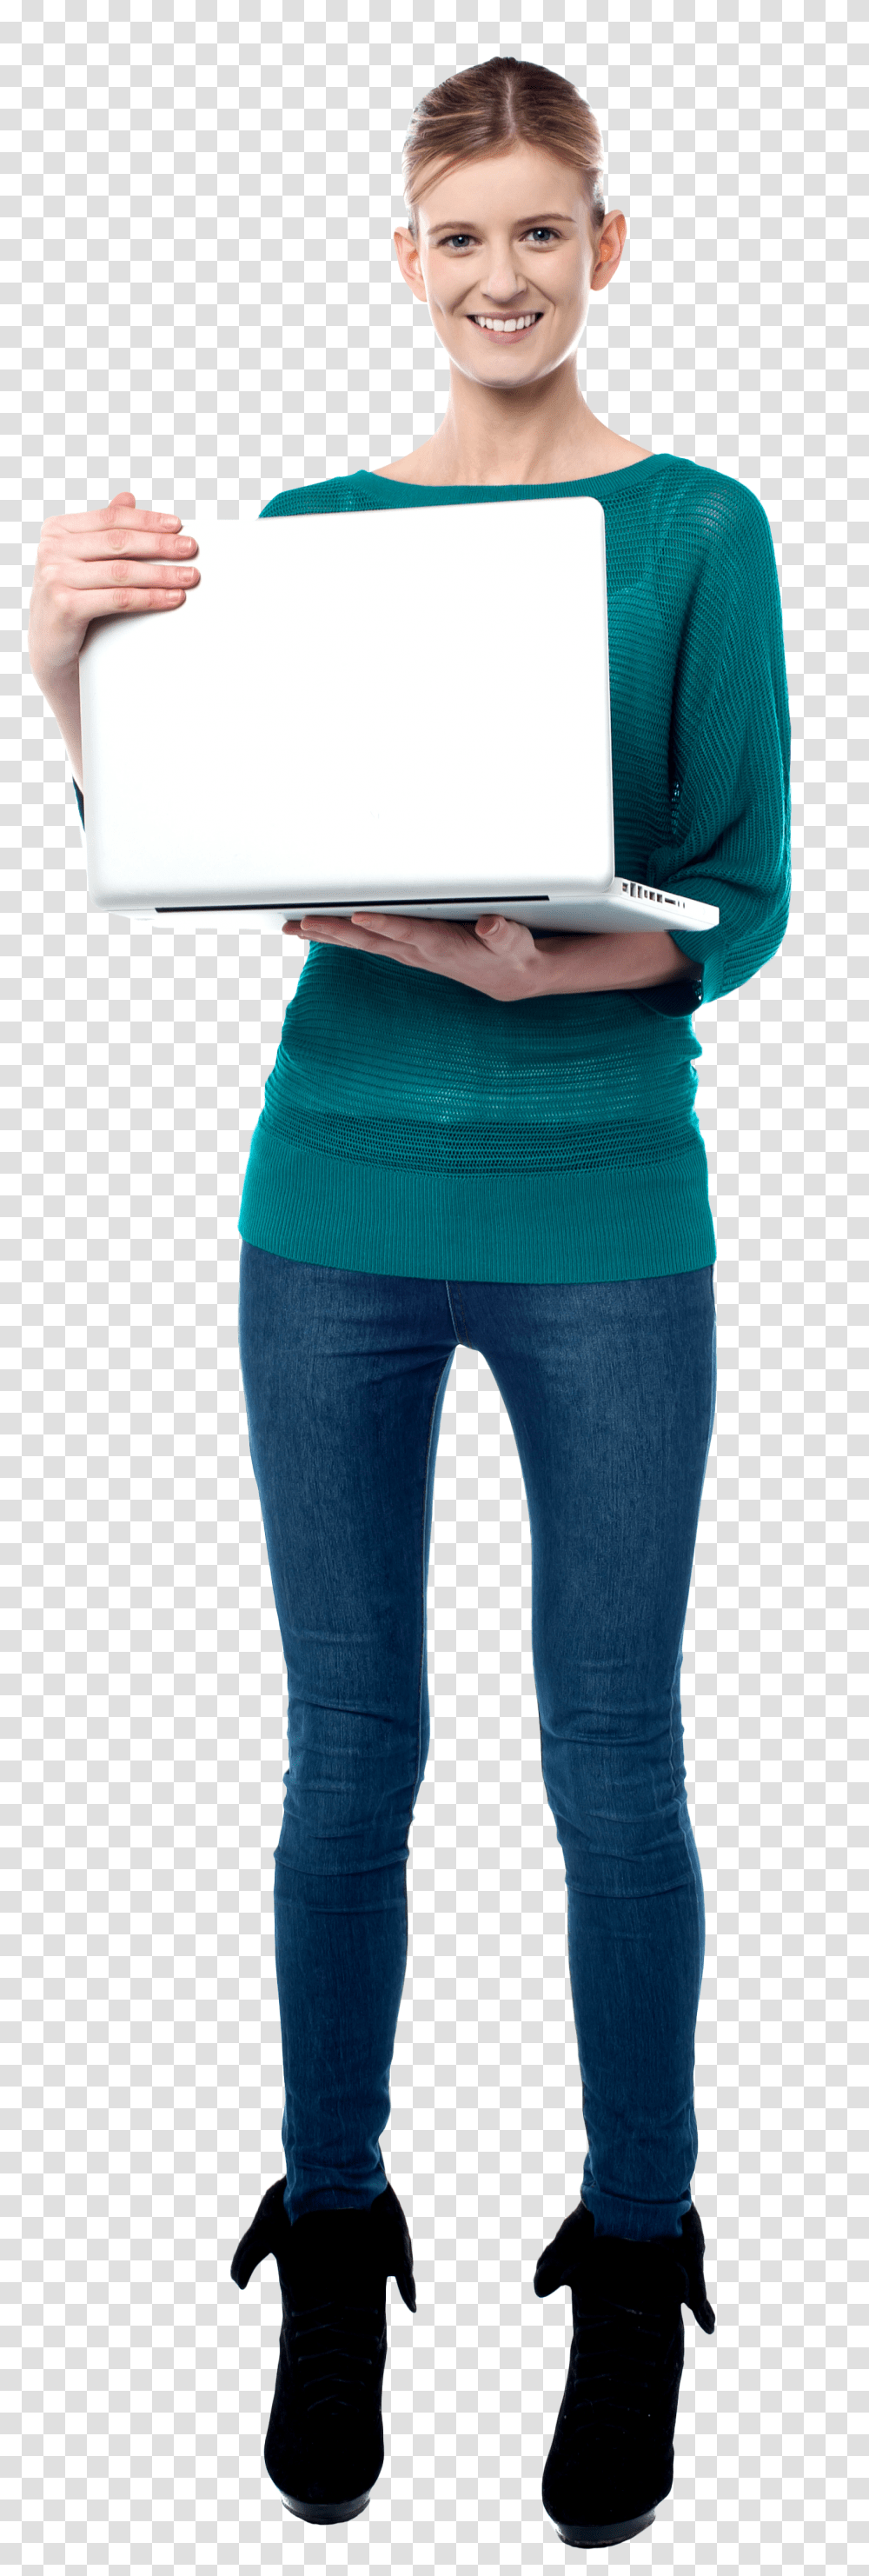 Standing Girl With Laptop Transparent Png